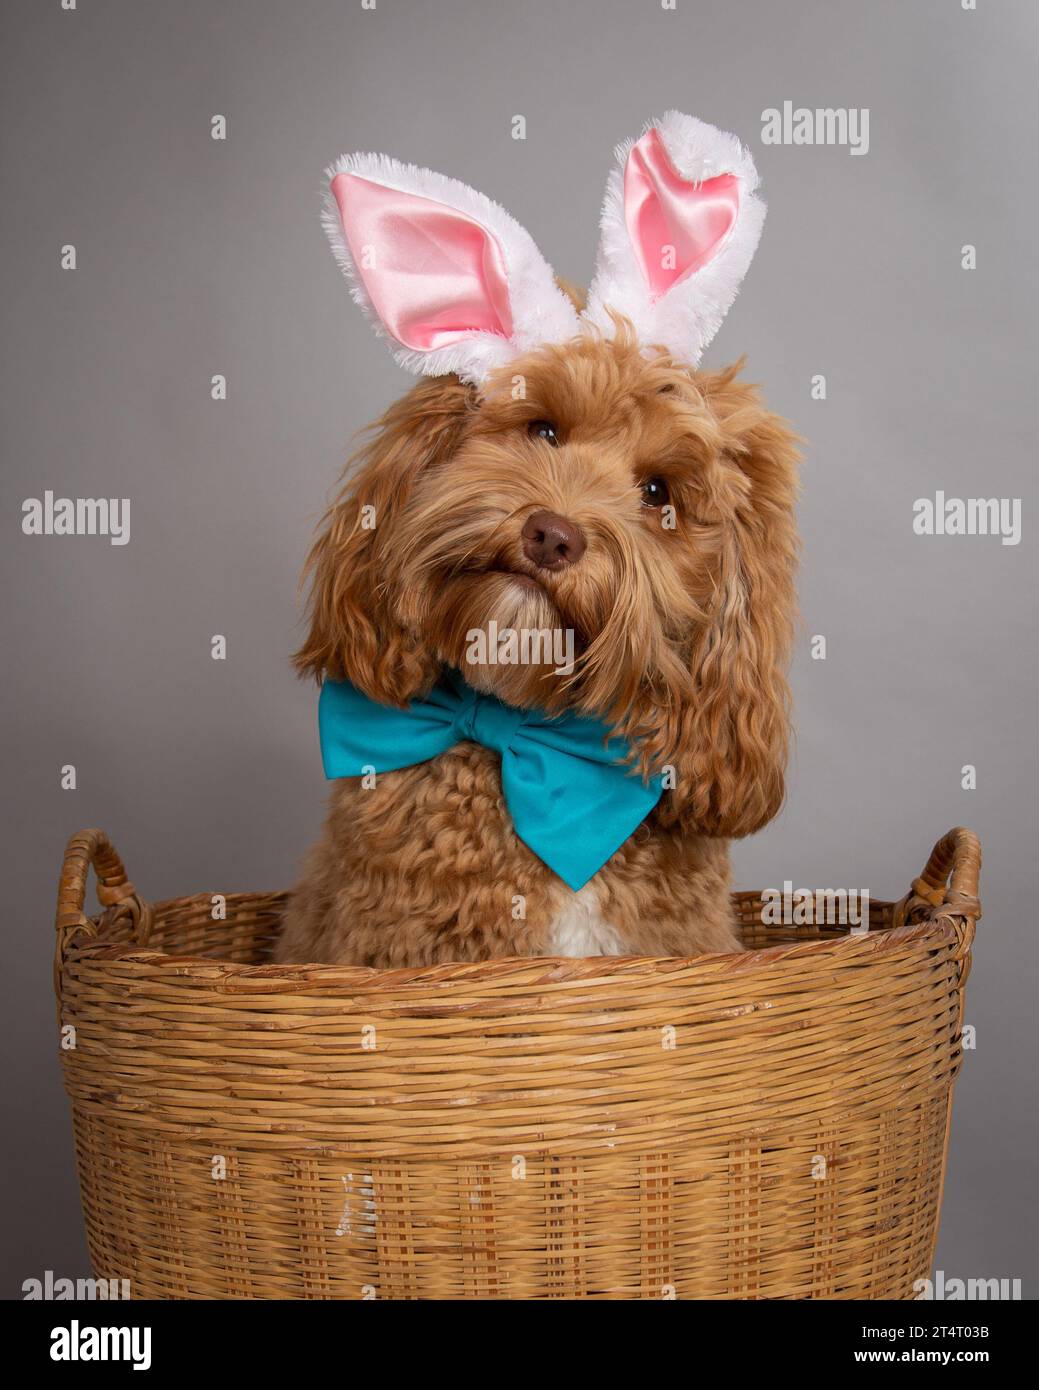 Portrait of a  cute brown miniature goldendoodle wearing bunny ears and bow tie sitting in a basket Stock Photo